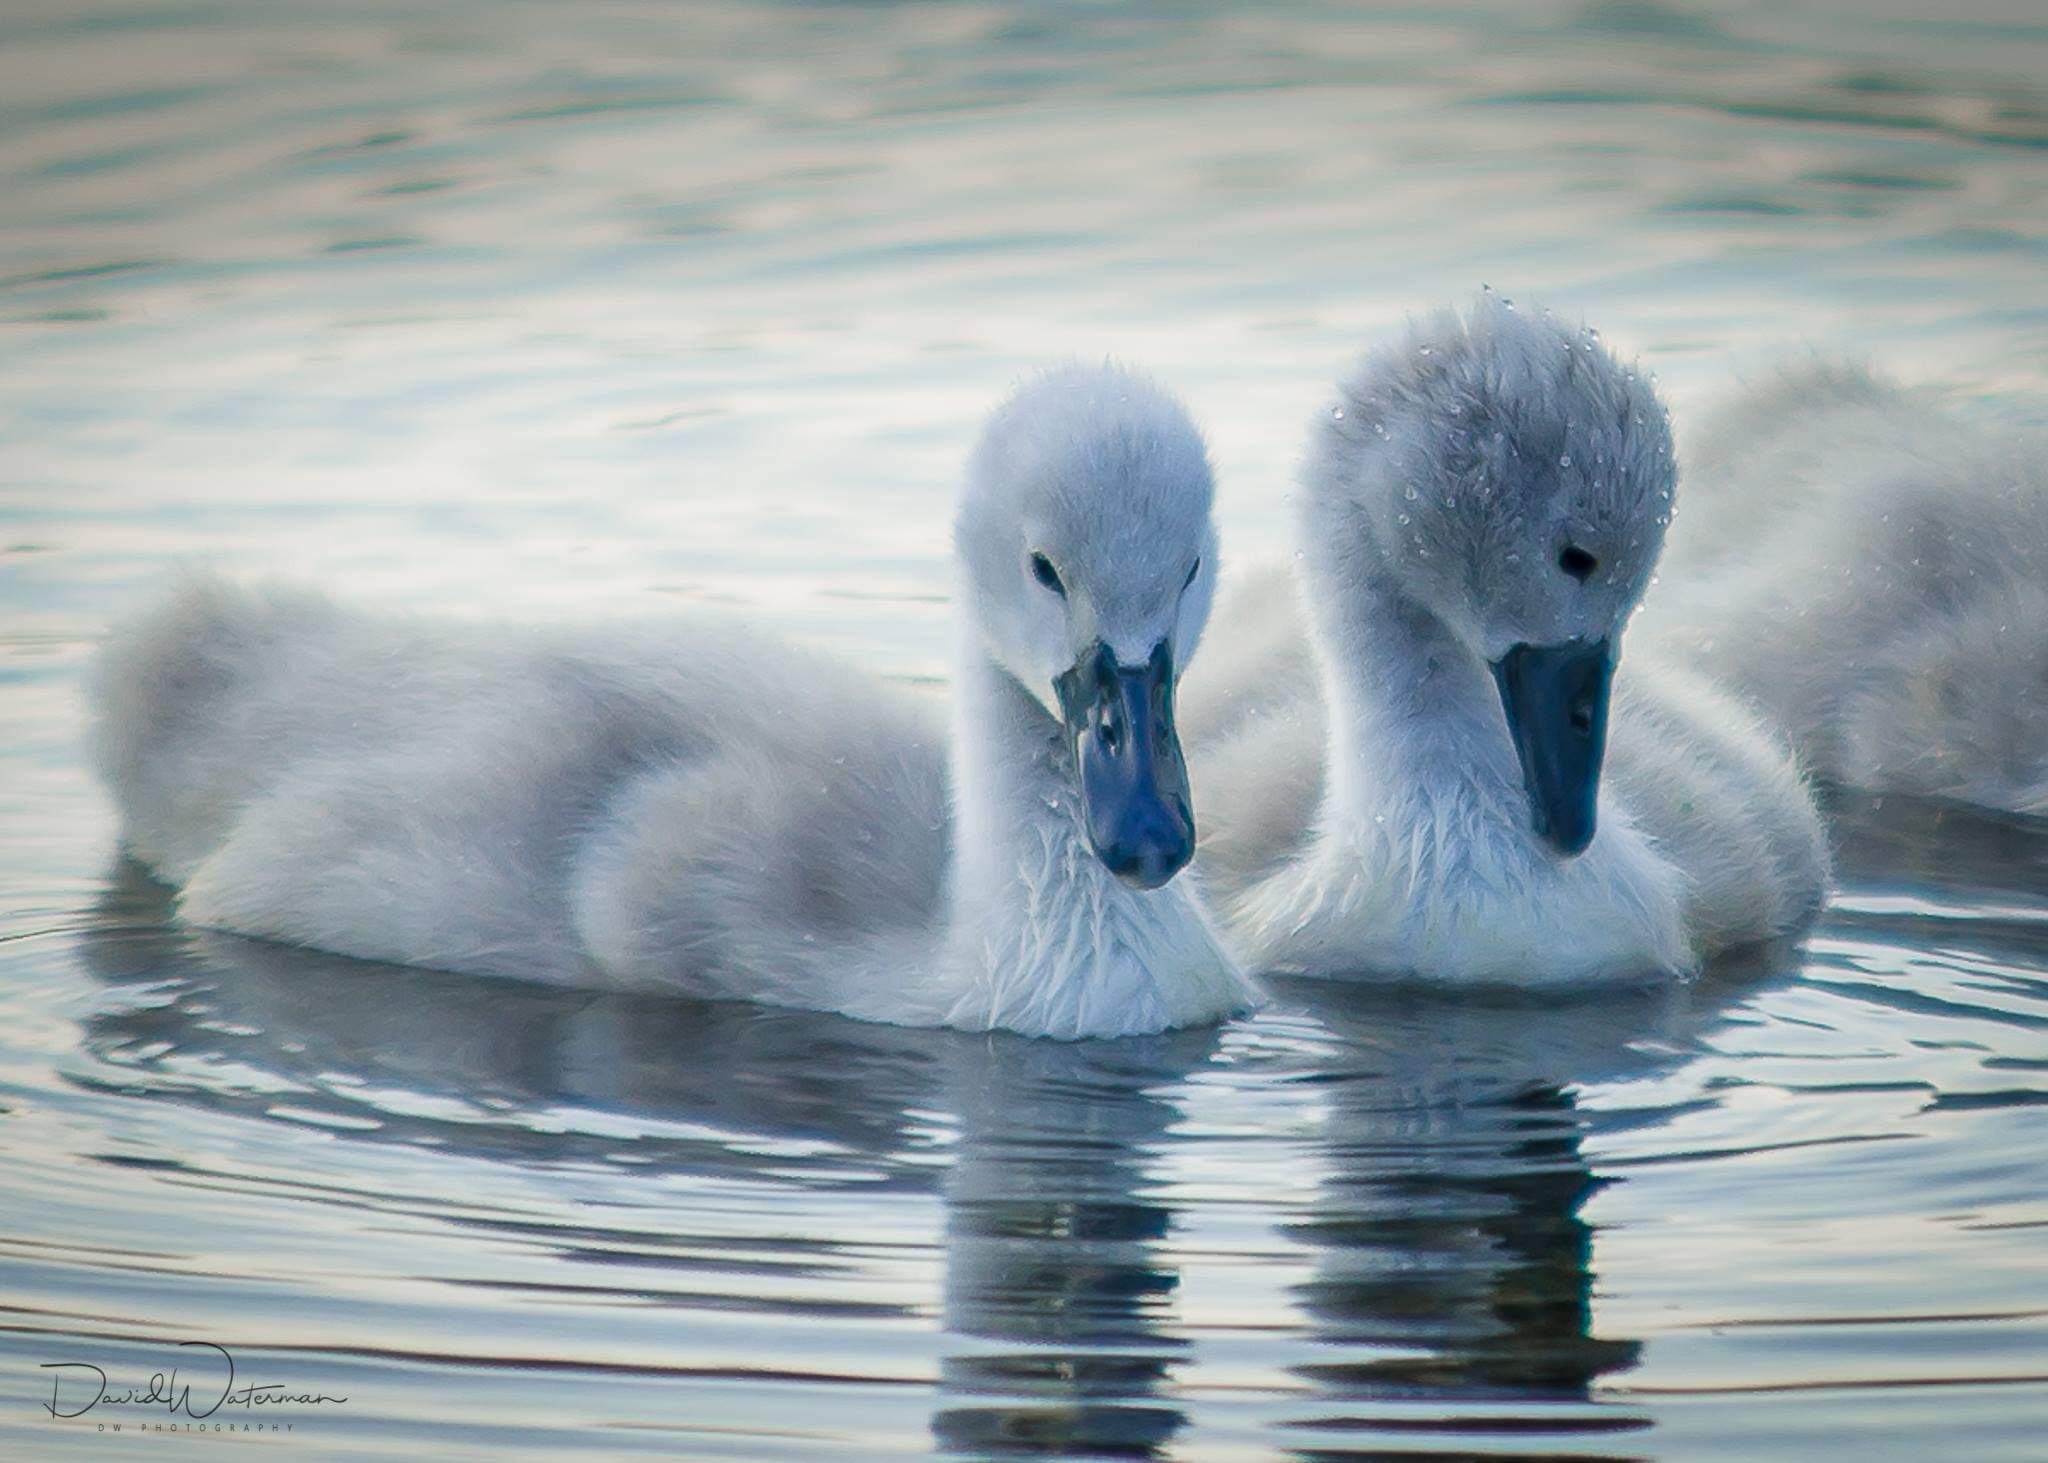 Cygnet Swans on the local River Colne at Cymbeline Meadows.